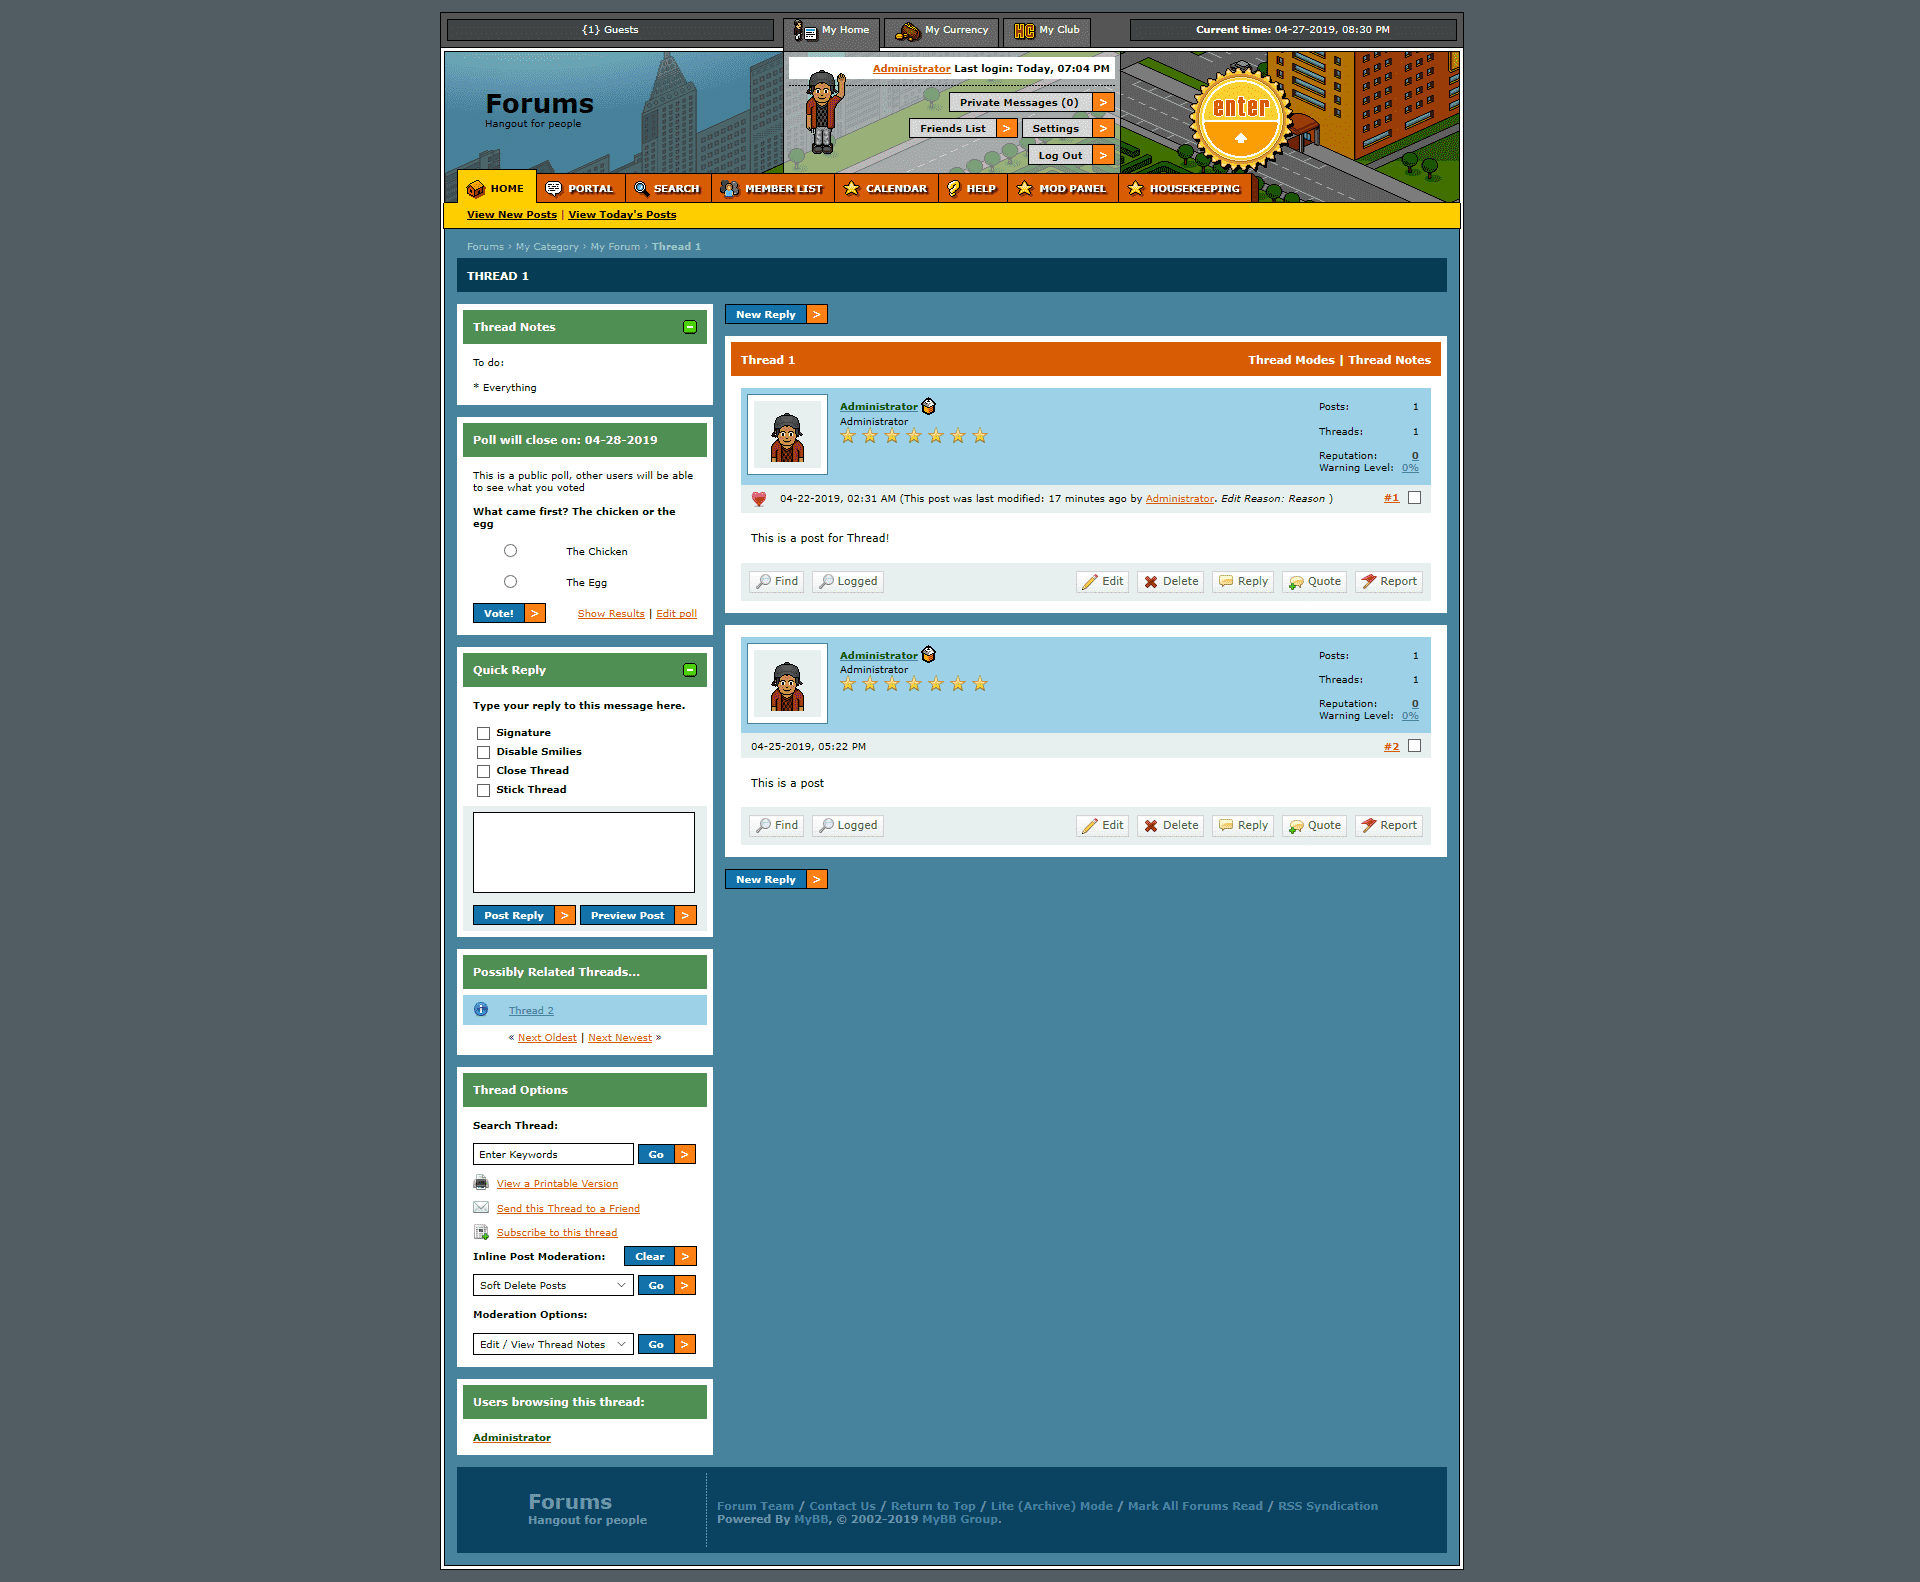 qv9agqT - Remaster 2006 Habbo Layout [release][work-in-progress] - RaGEZONE Forums